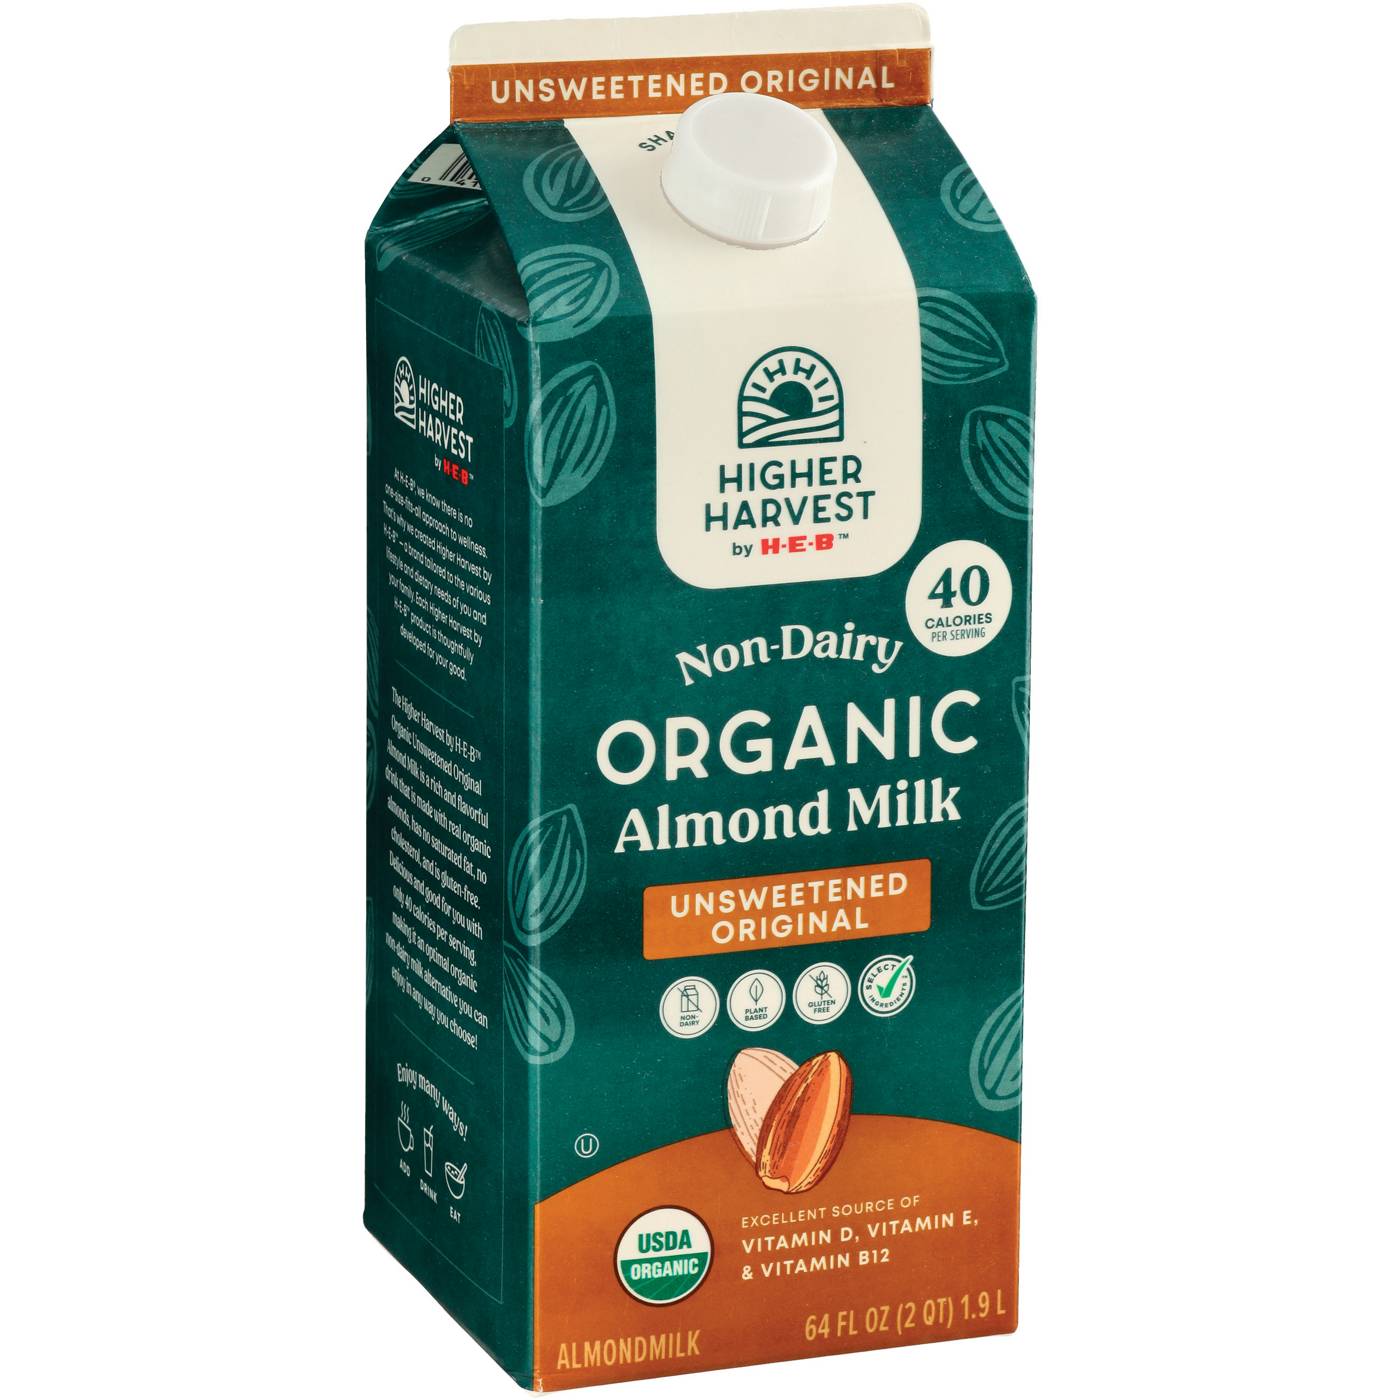 Higher Harvest by H-E-B Organic Non-Dairy Almond Milk – Unsweetened Original; image 2 of 2